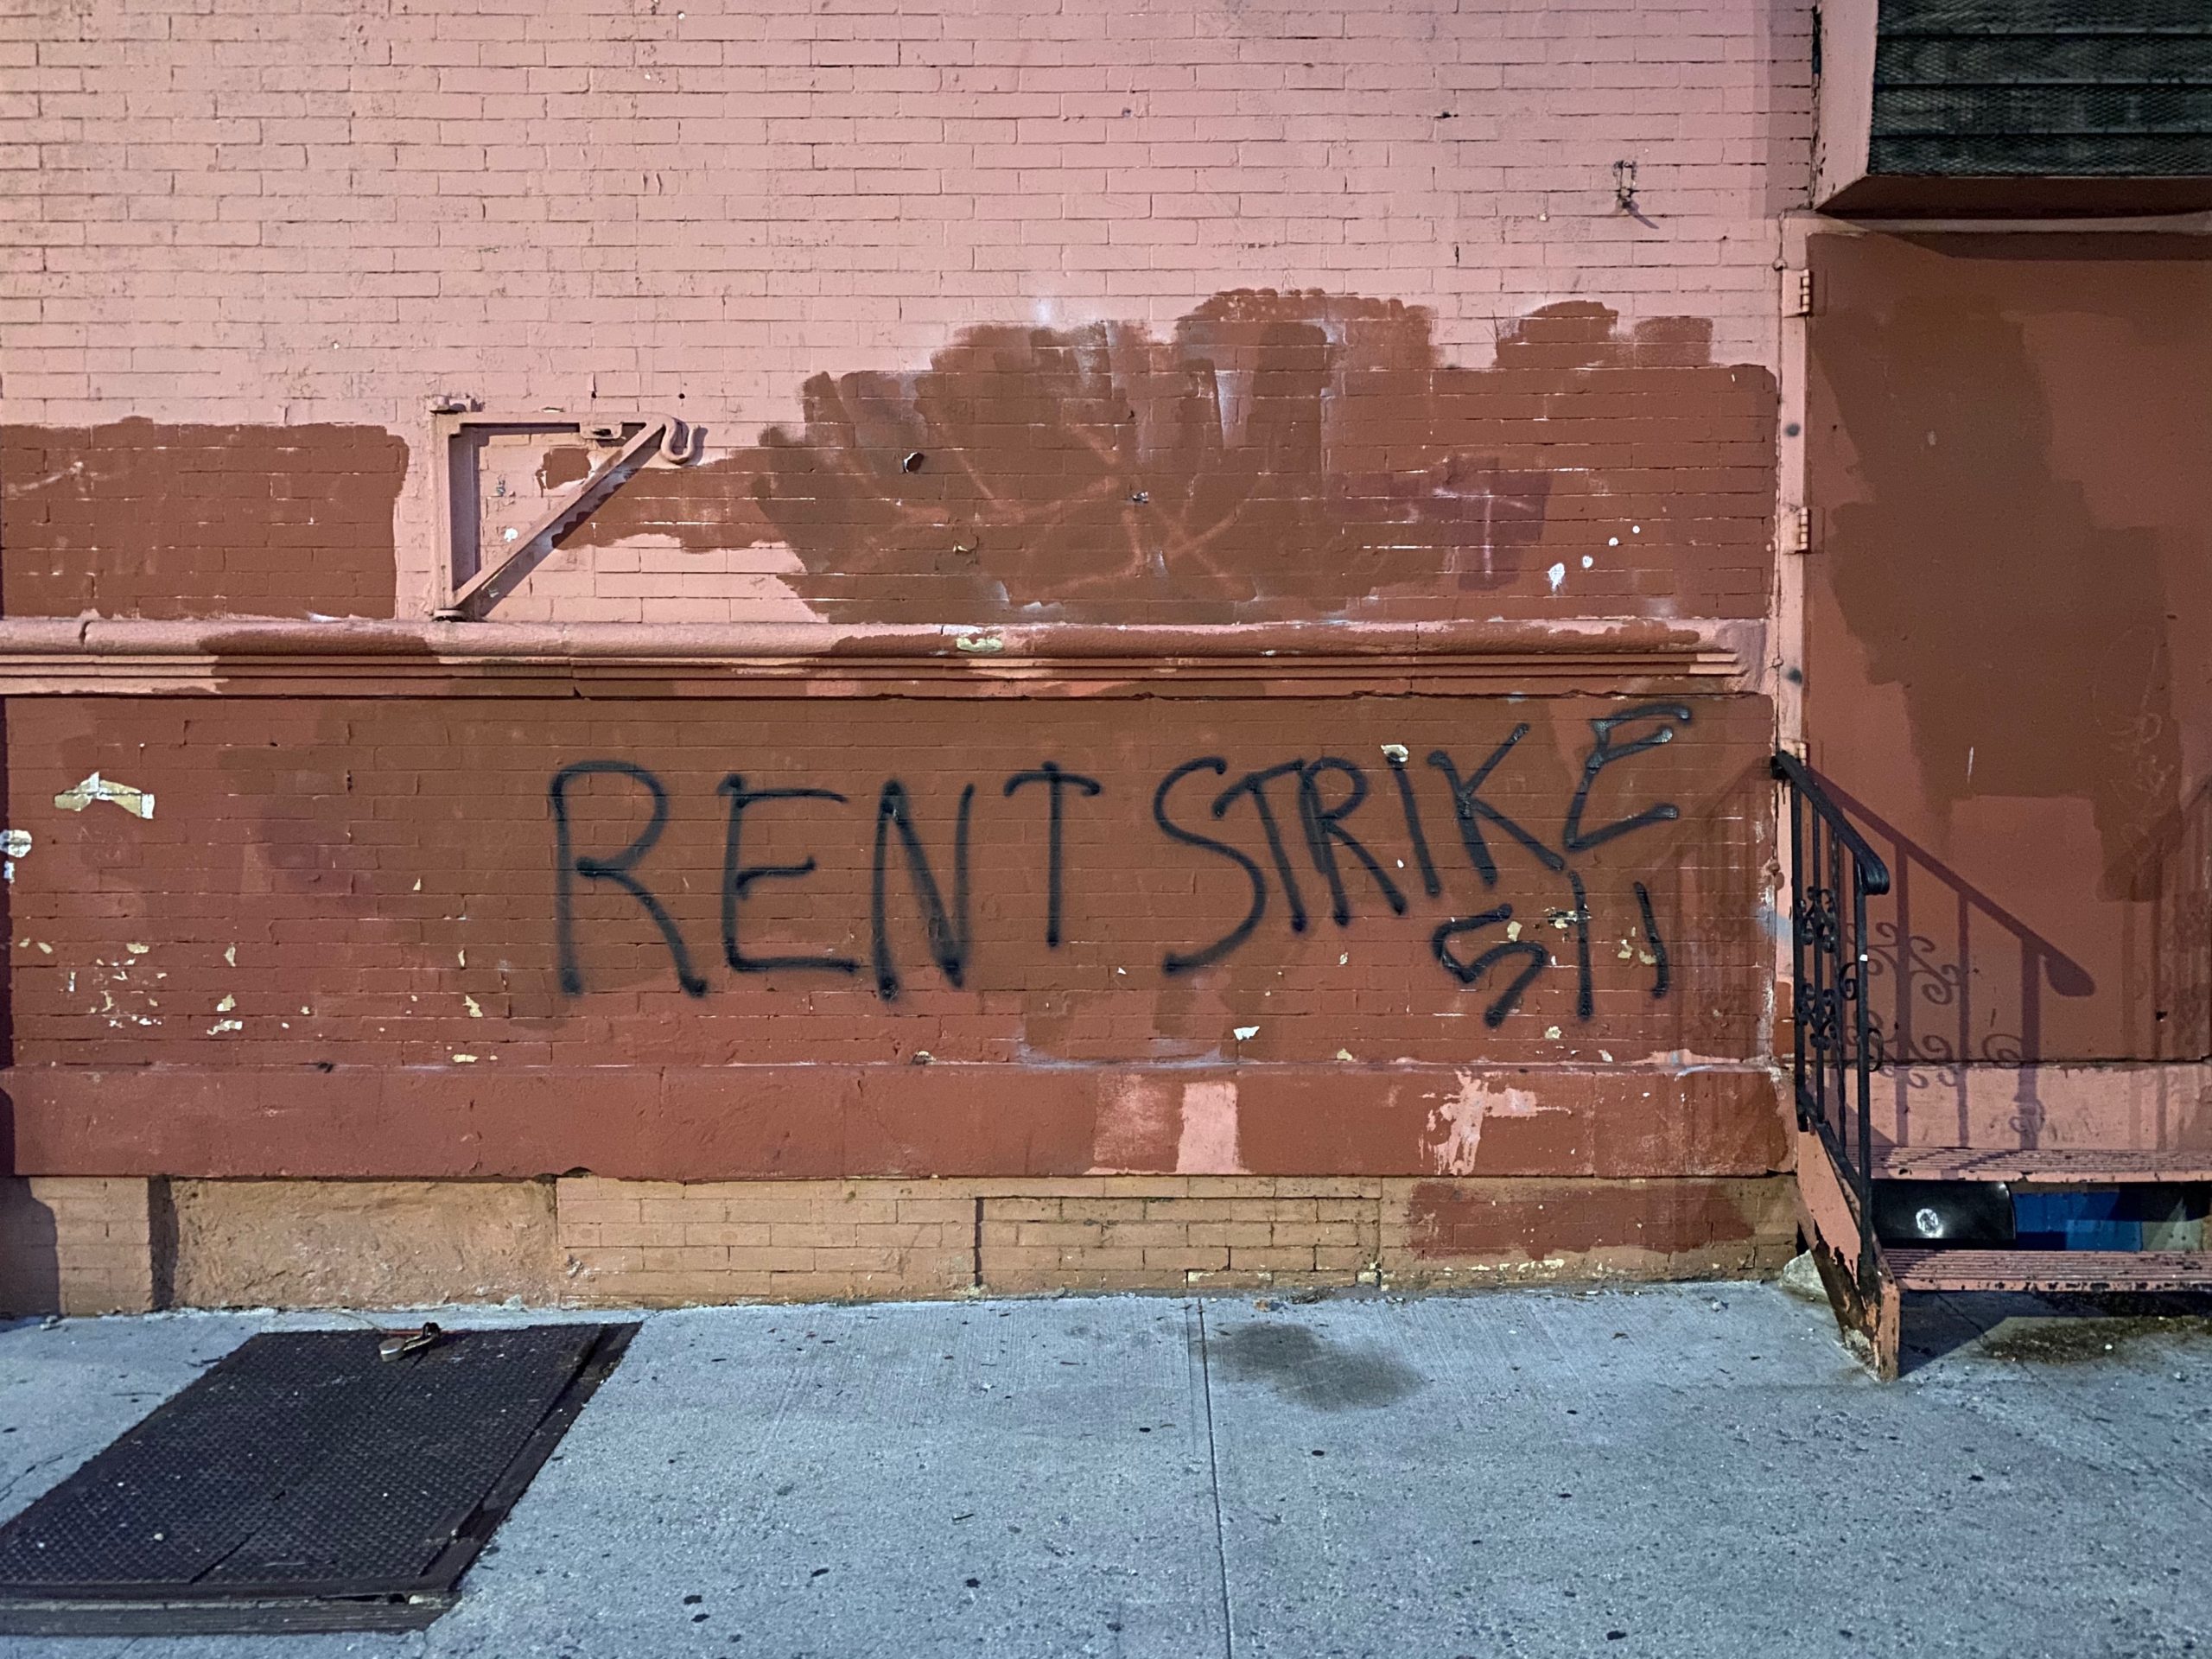 A picture of rent strike graffiti on building.